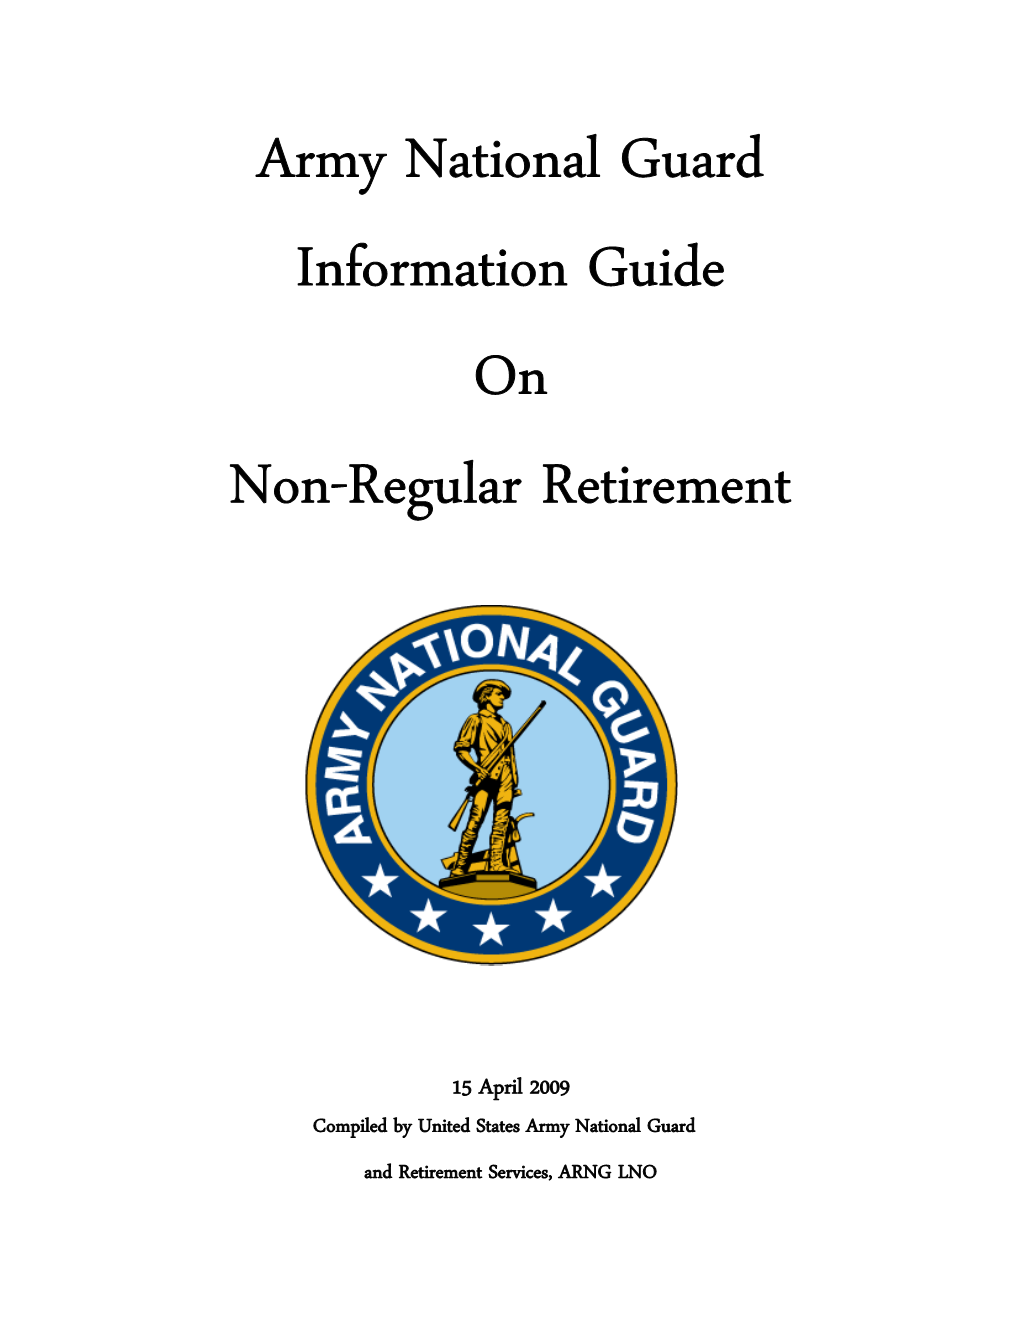 Army National Guard Information Guide